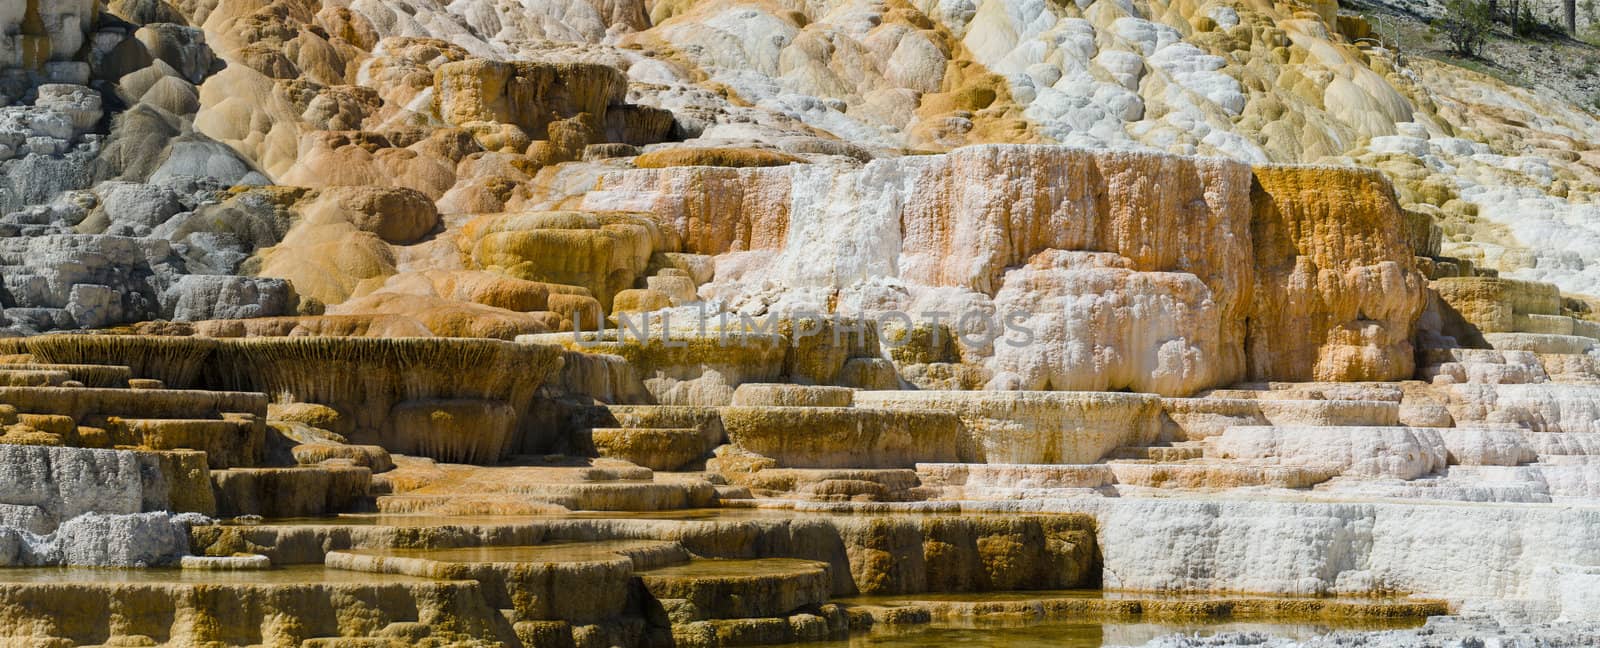 Panorama of travertine (limestone) terraces, Palette Springs, Yellowstone National Park, Wyoming, USA by CharlesBolin